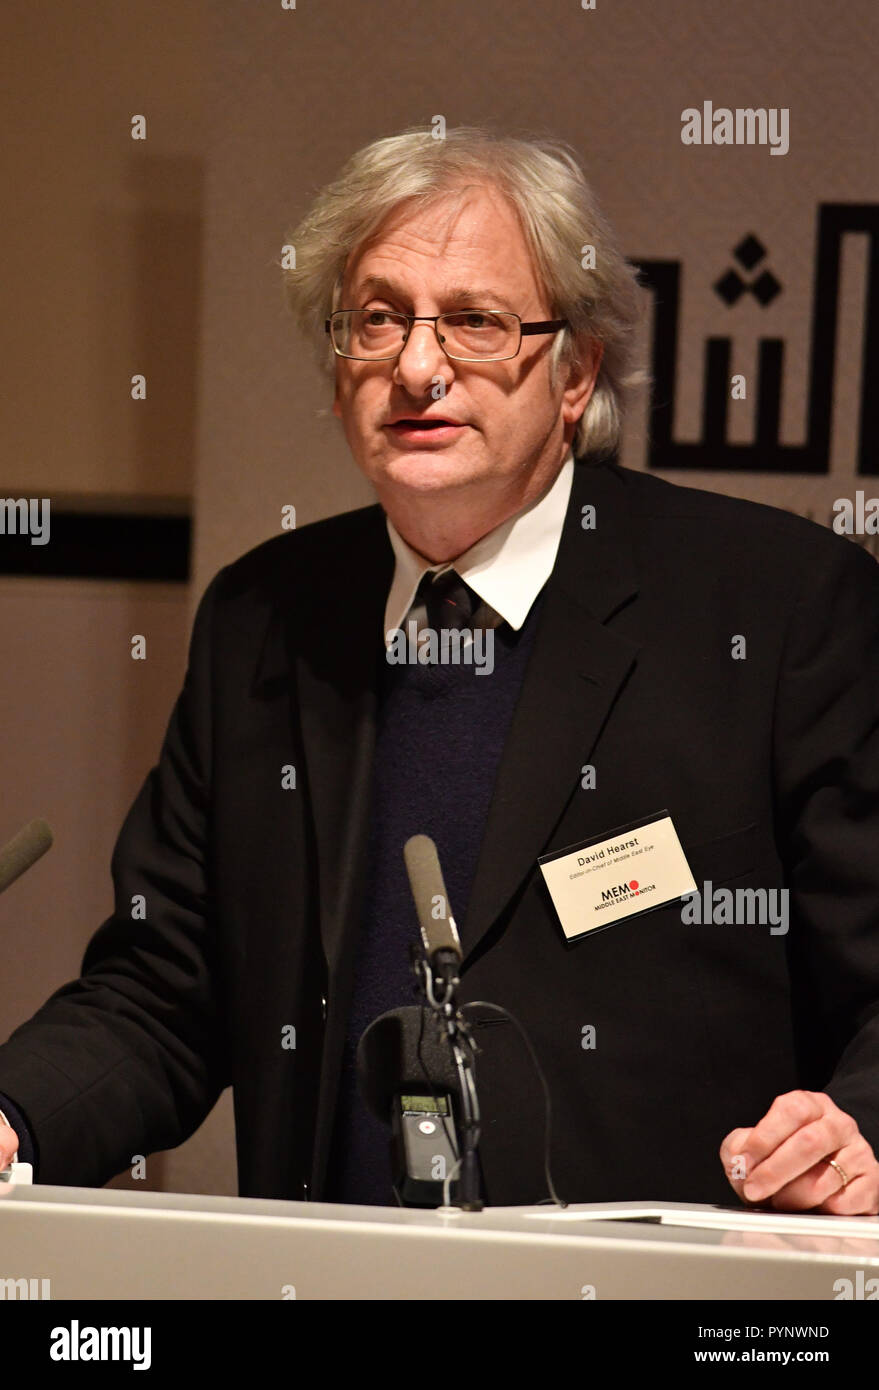 David Hearst Editor In Chief Of The Middle East Eye Speaks During A Memorial Event For The Murdered Journalist Jamal Khashoggi At The Mechanical Engineers Institute In London PYNWND 